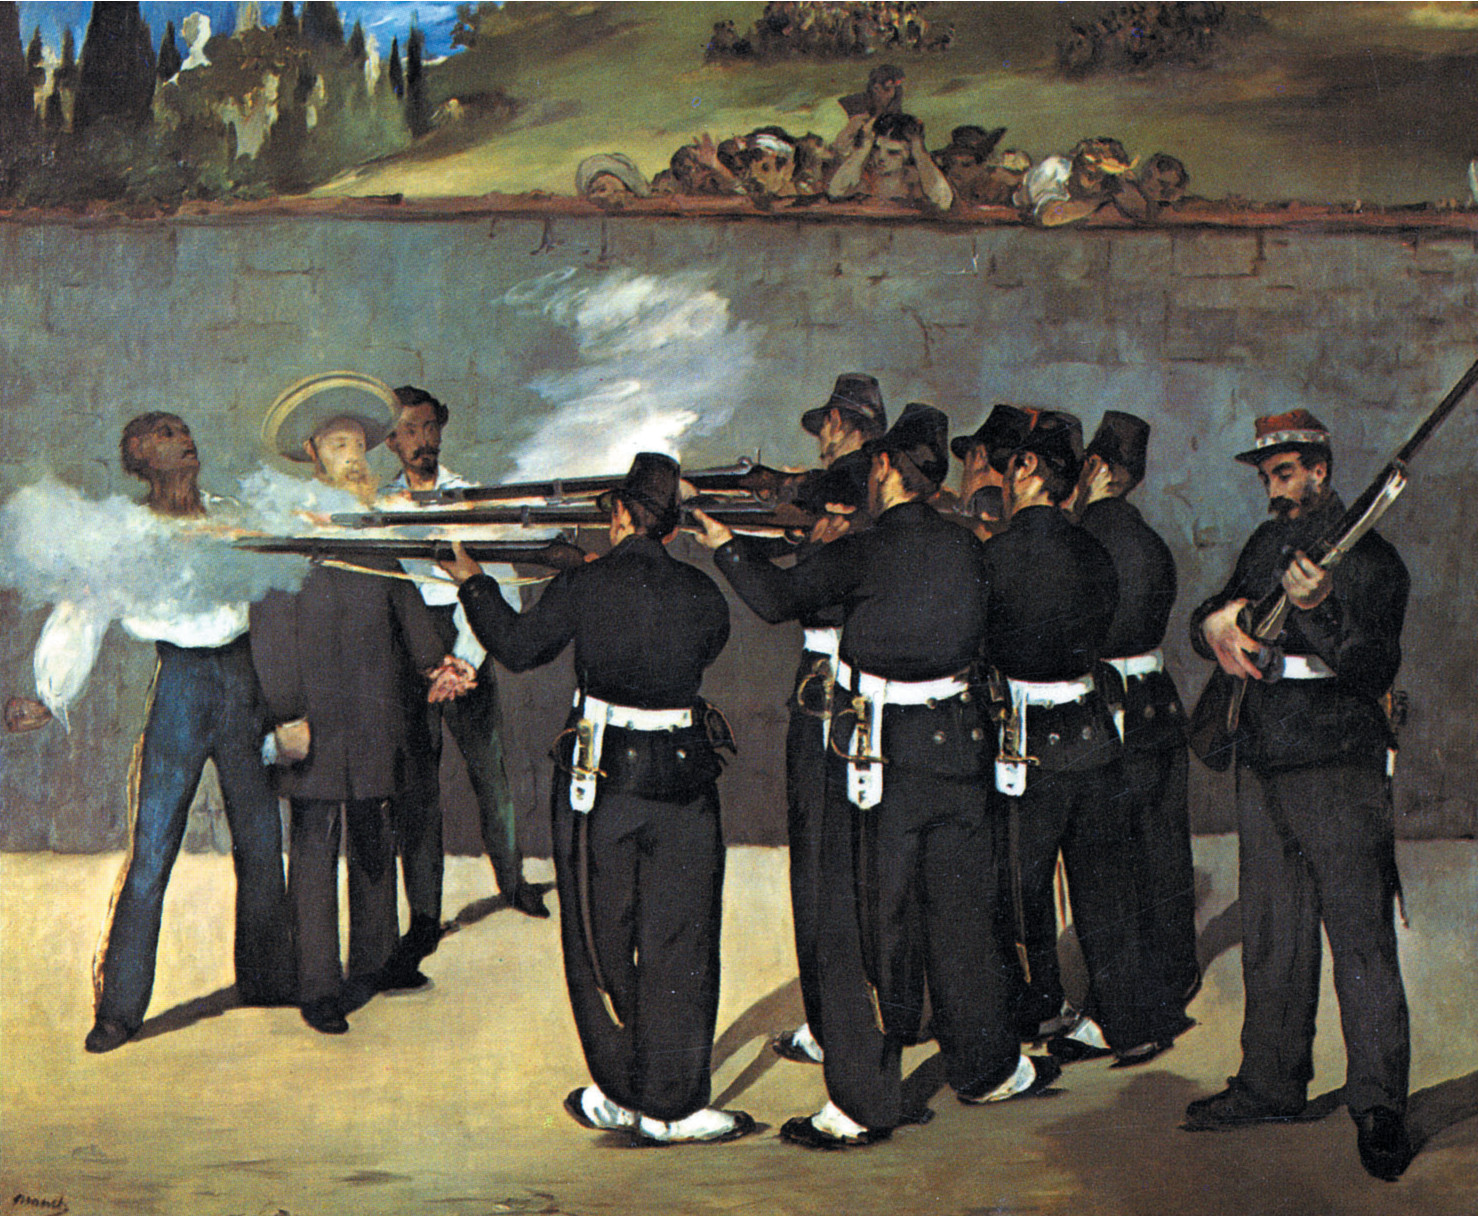 After the withdrawal of French troops from Mexico, Emperor Maximilian is executed by a Mexican firing squad in this contemporary painting by French artist Edward Manet.